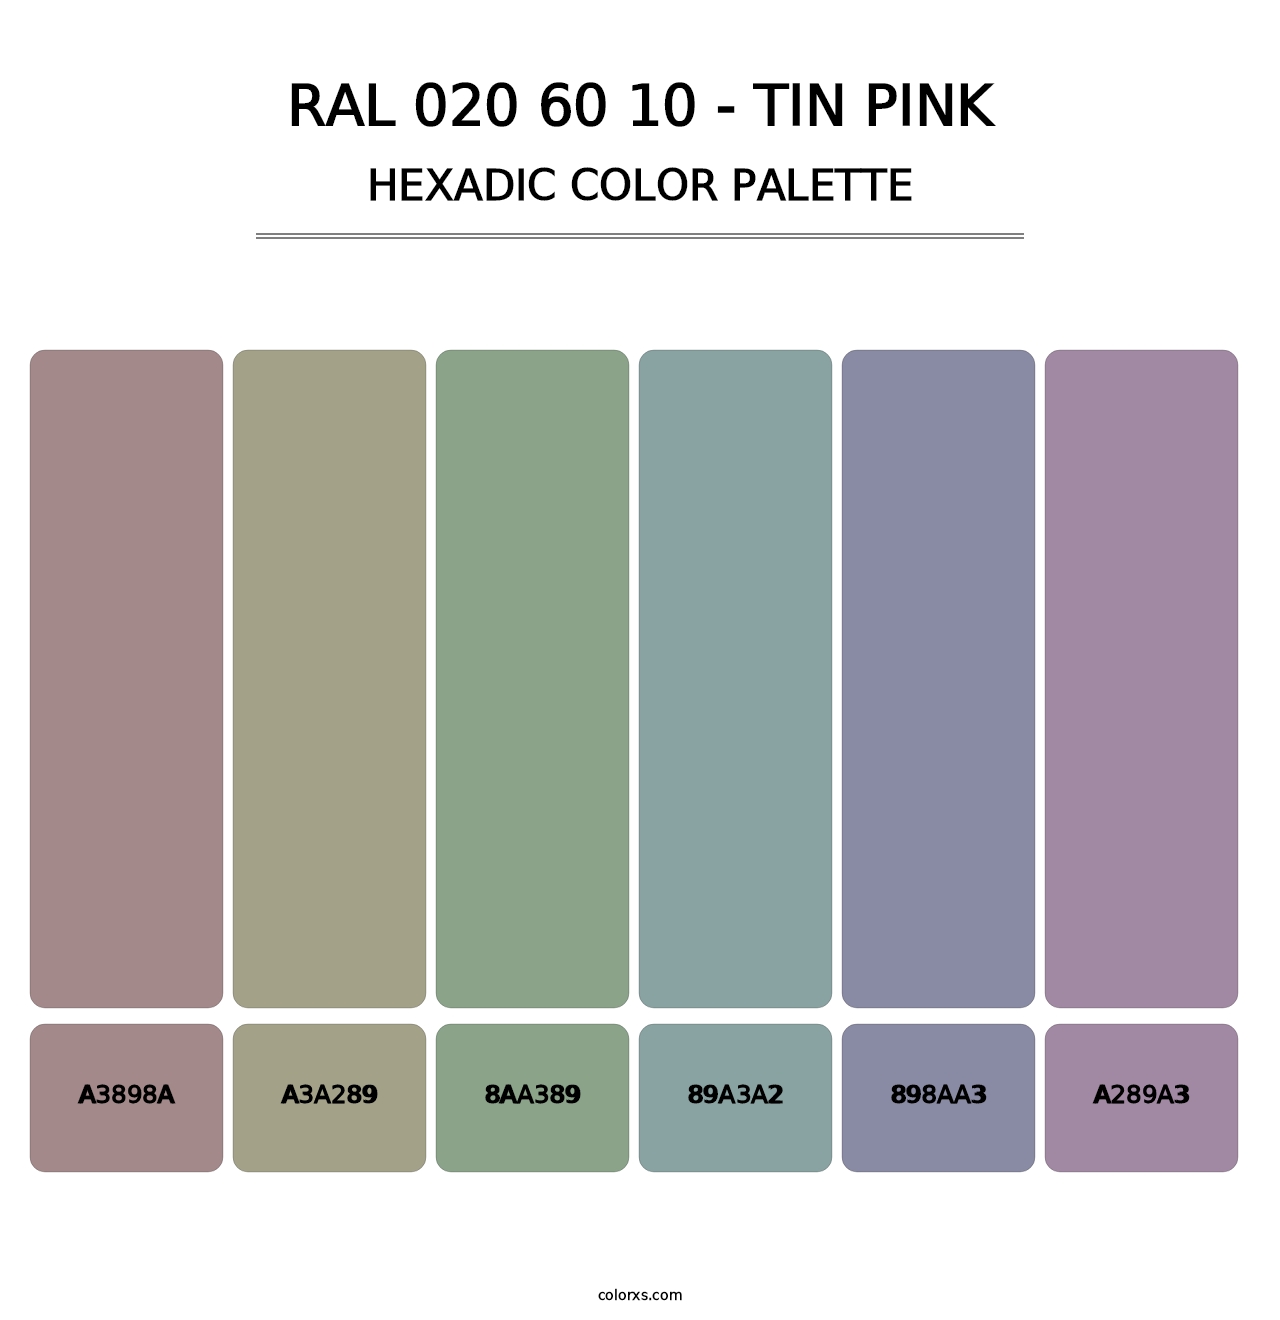 RAL 020 60 10 - Tin Pink - Hexadic Color Palette